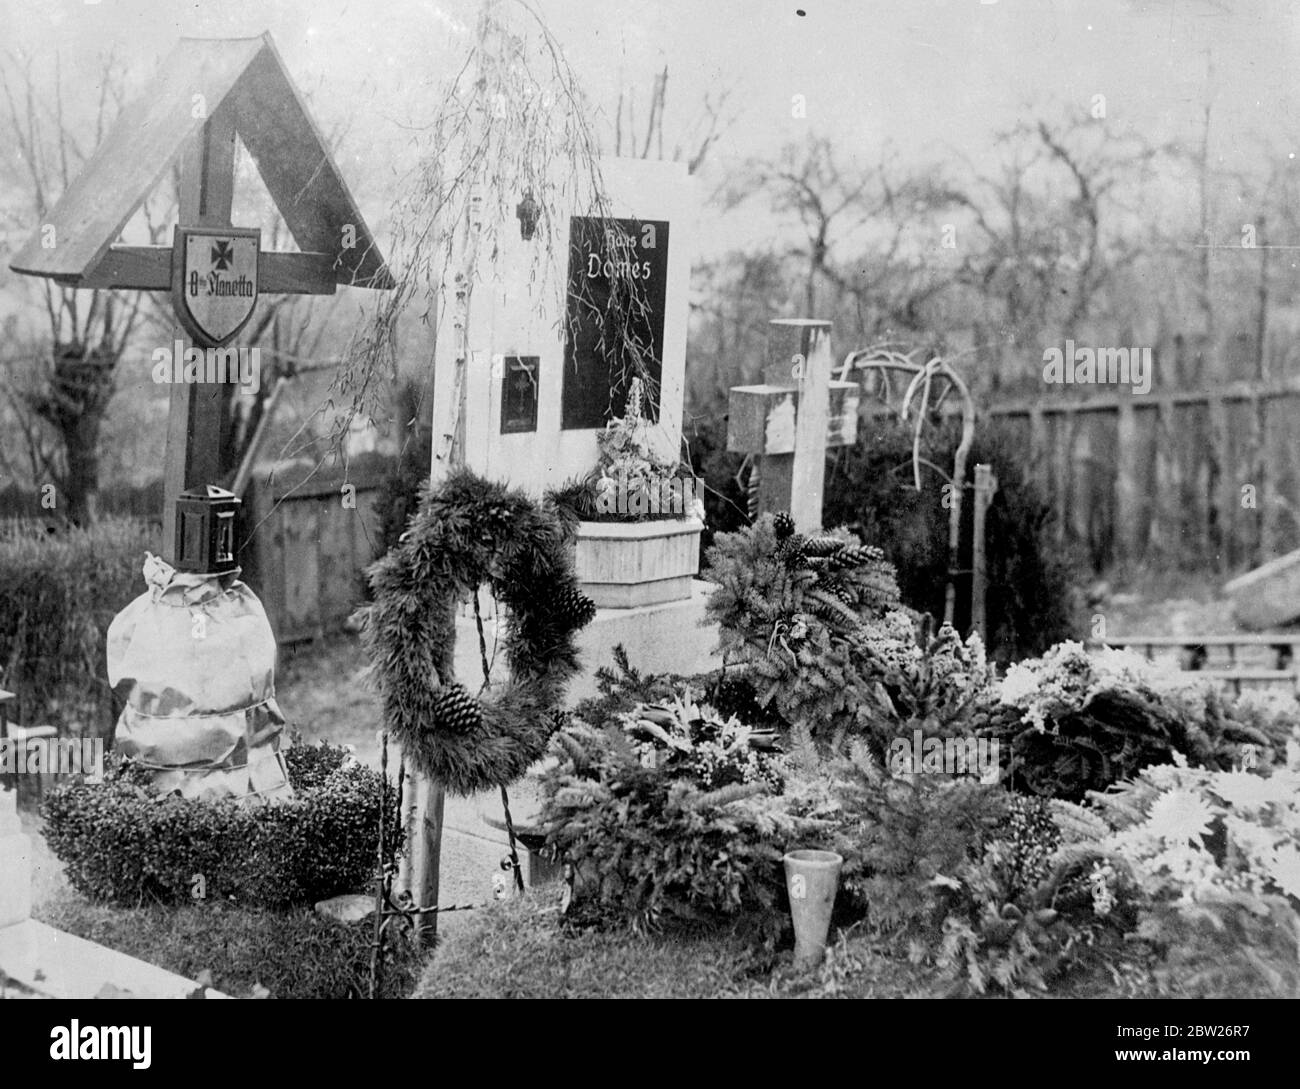 Austrian Nazi tributes on grave of Dollfuss assassin. Austrian Nazi, jubilant at their new found 'freedom', placed wreaths on the grave in Vienna of Planetta, who was hanged in July, 1934, for his part in the assassination of Chancellor Dollfuss. 25 February 26 1938 Stock Photo